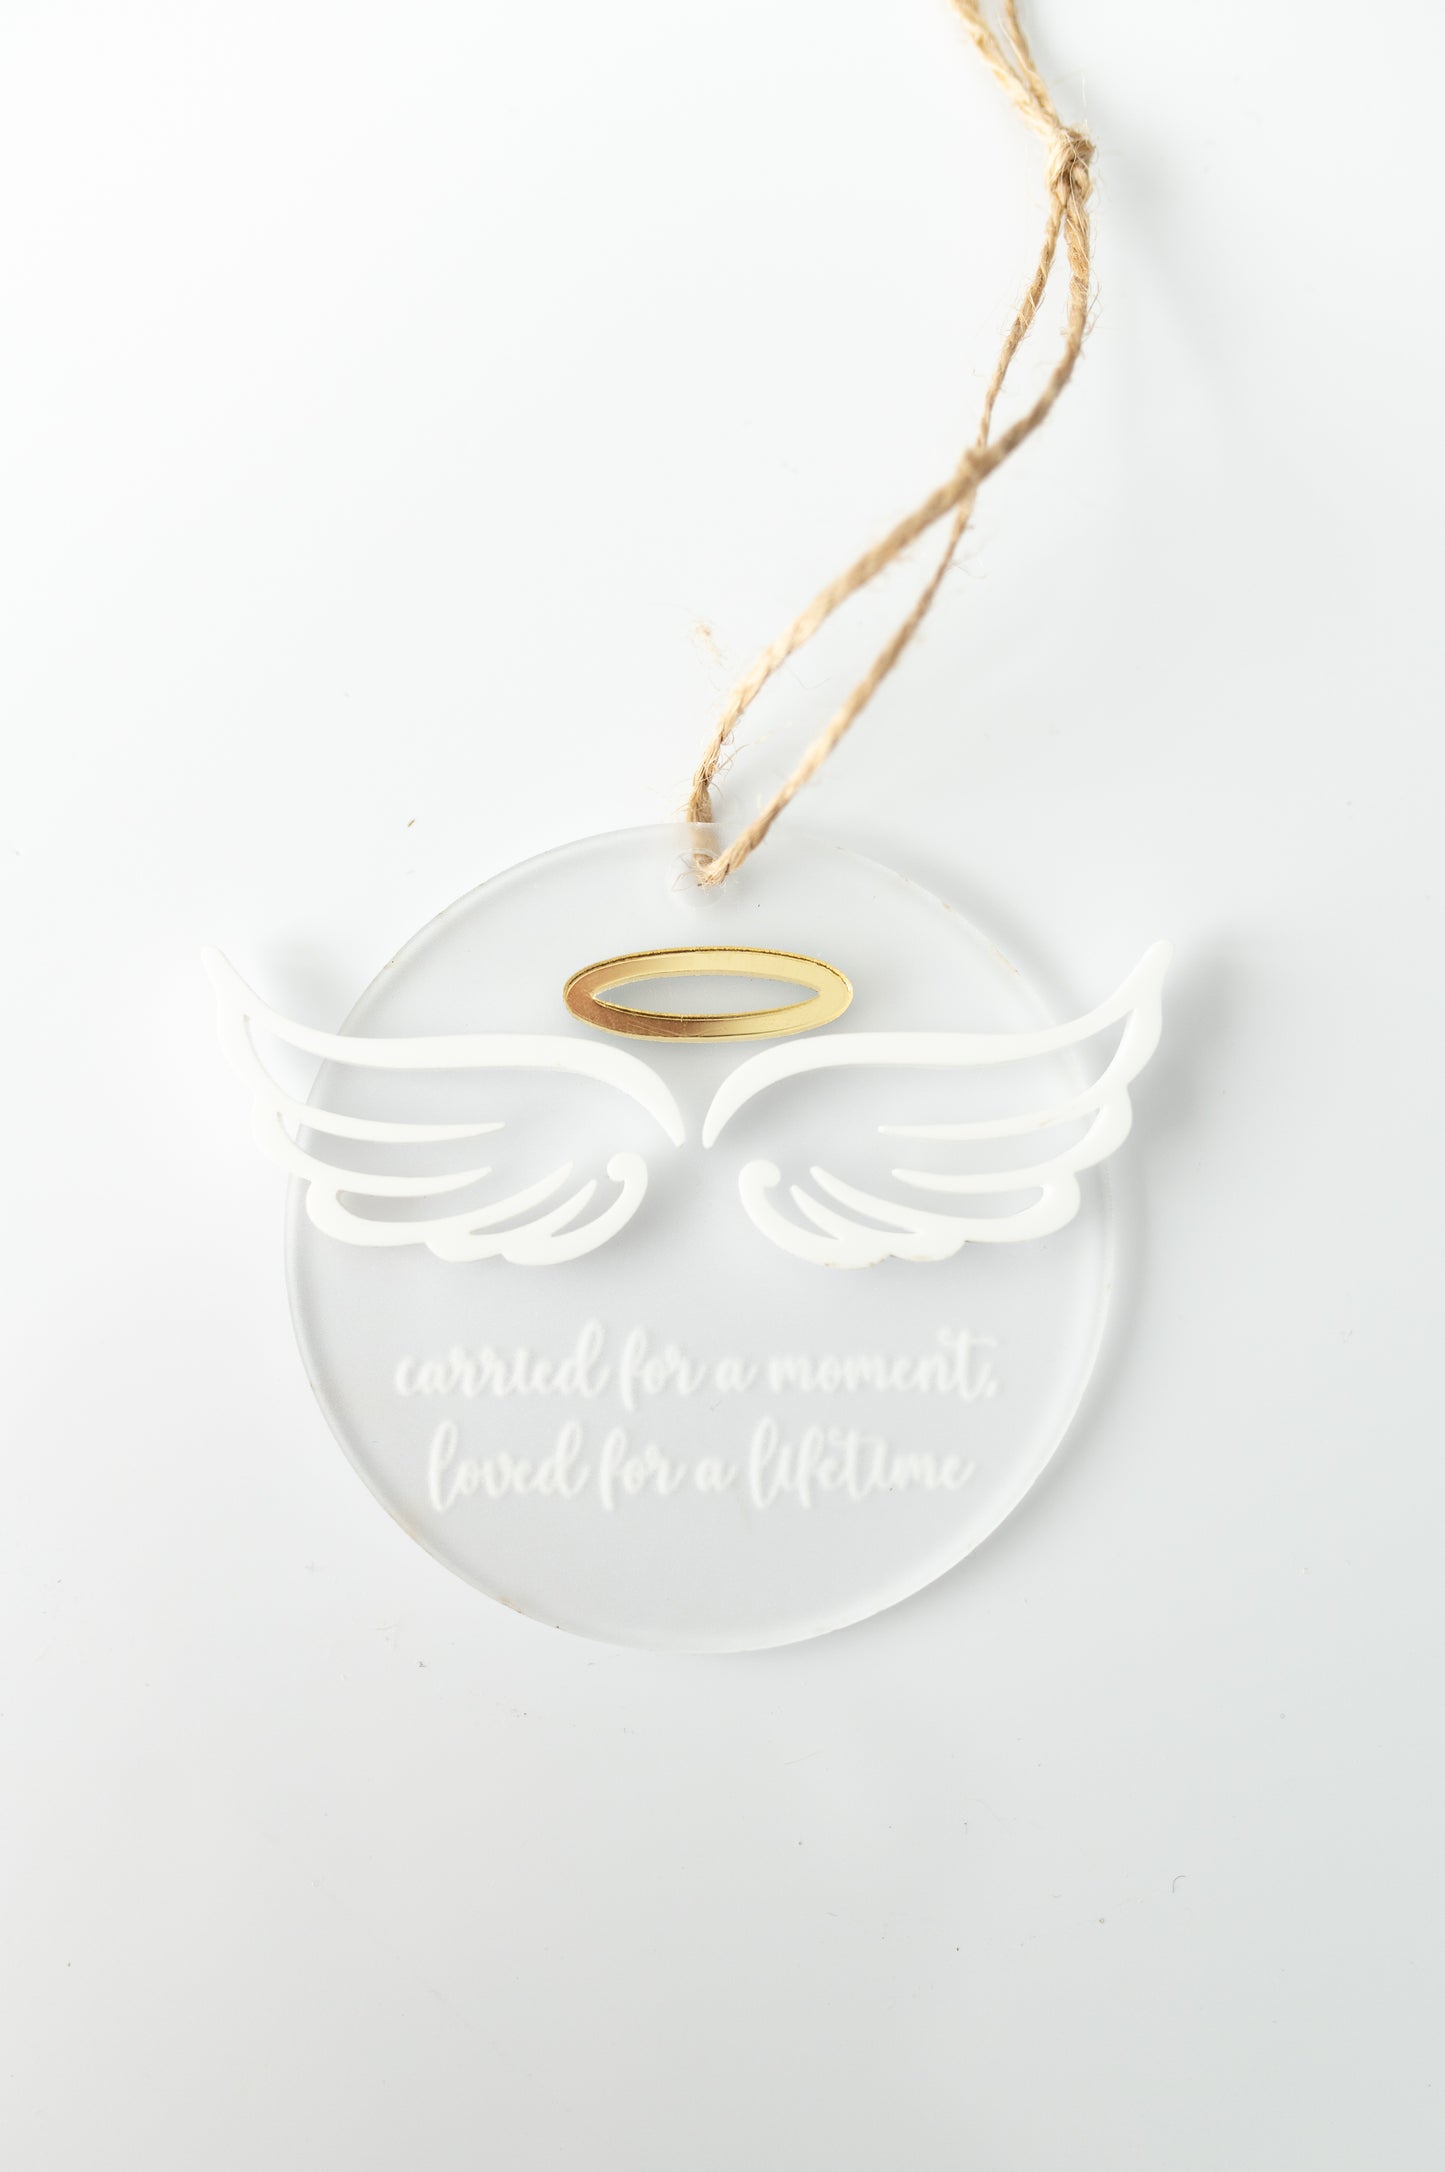 Infant Loss Memorial Ornament - Carried for a moment, Loved for a lifetime